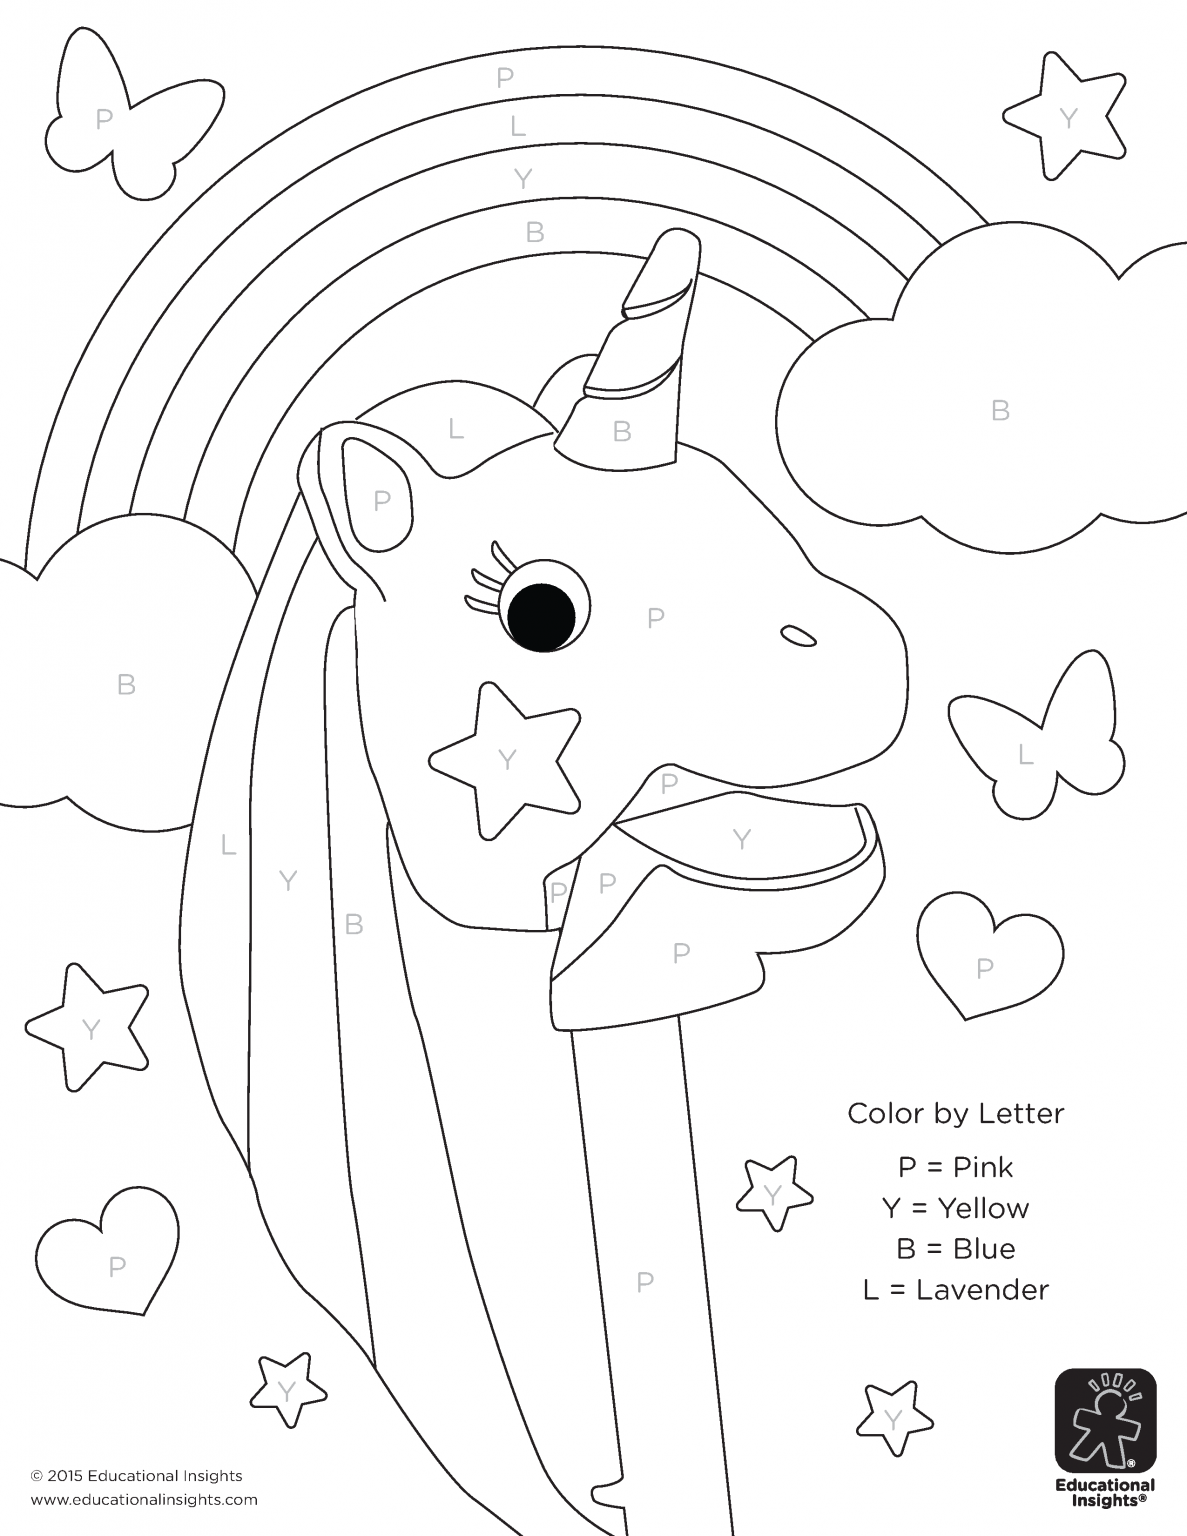 rainbow-color-by-number-for-kids-101-coloring